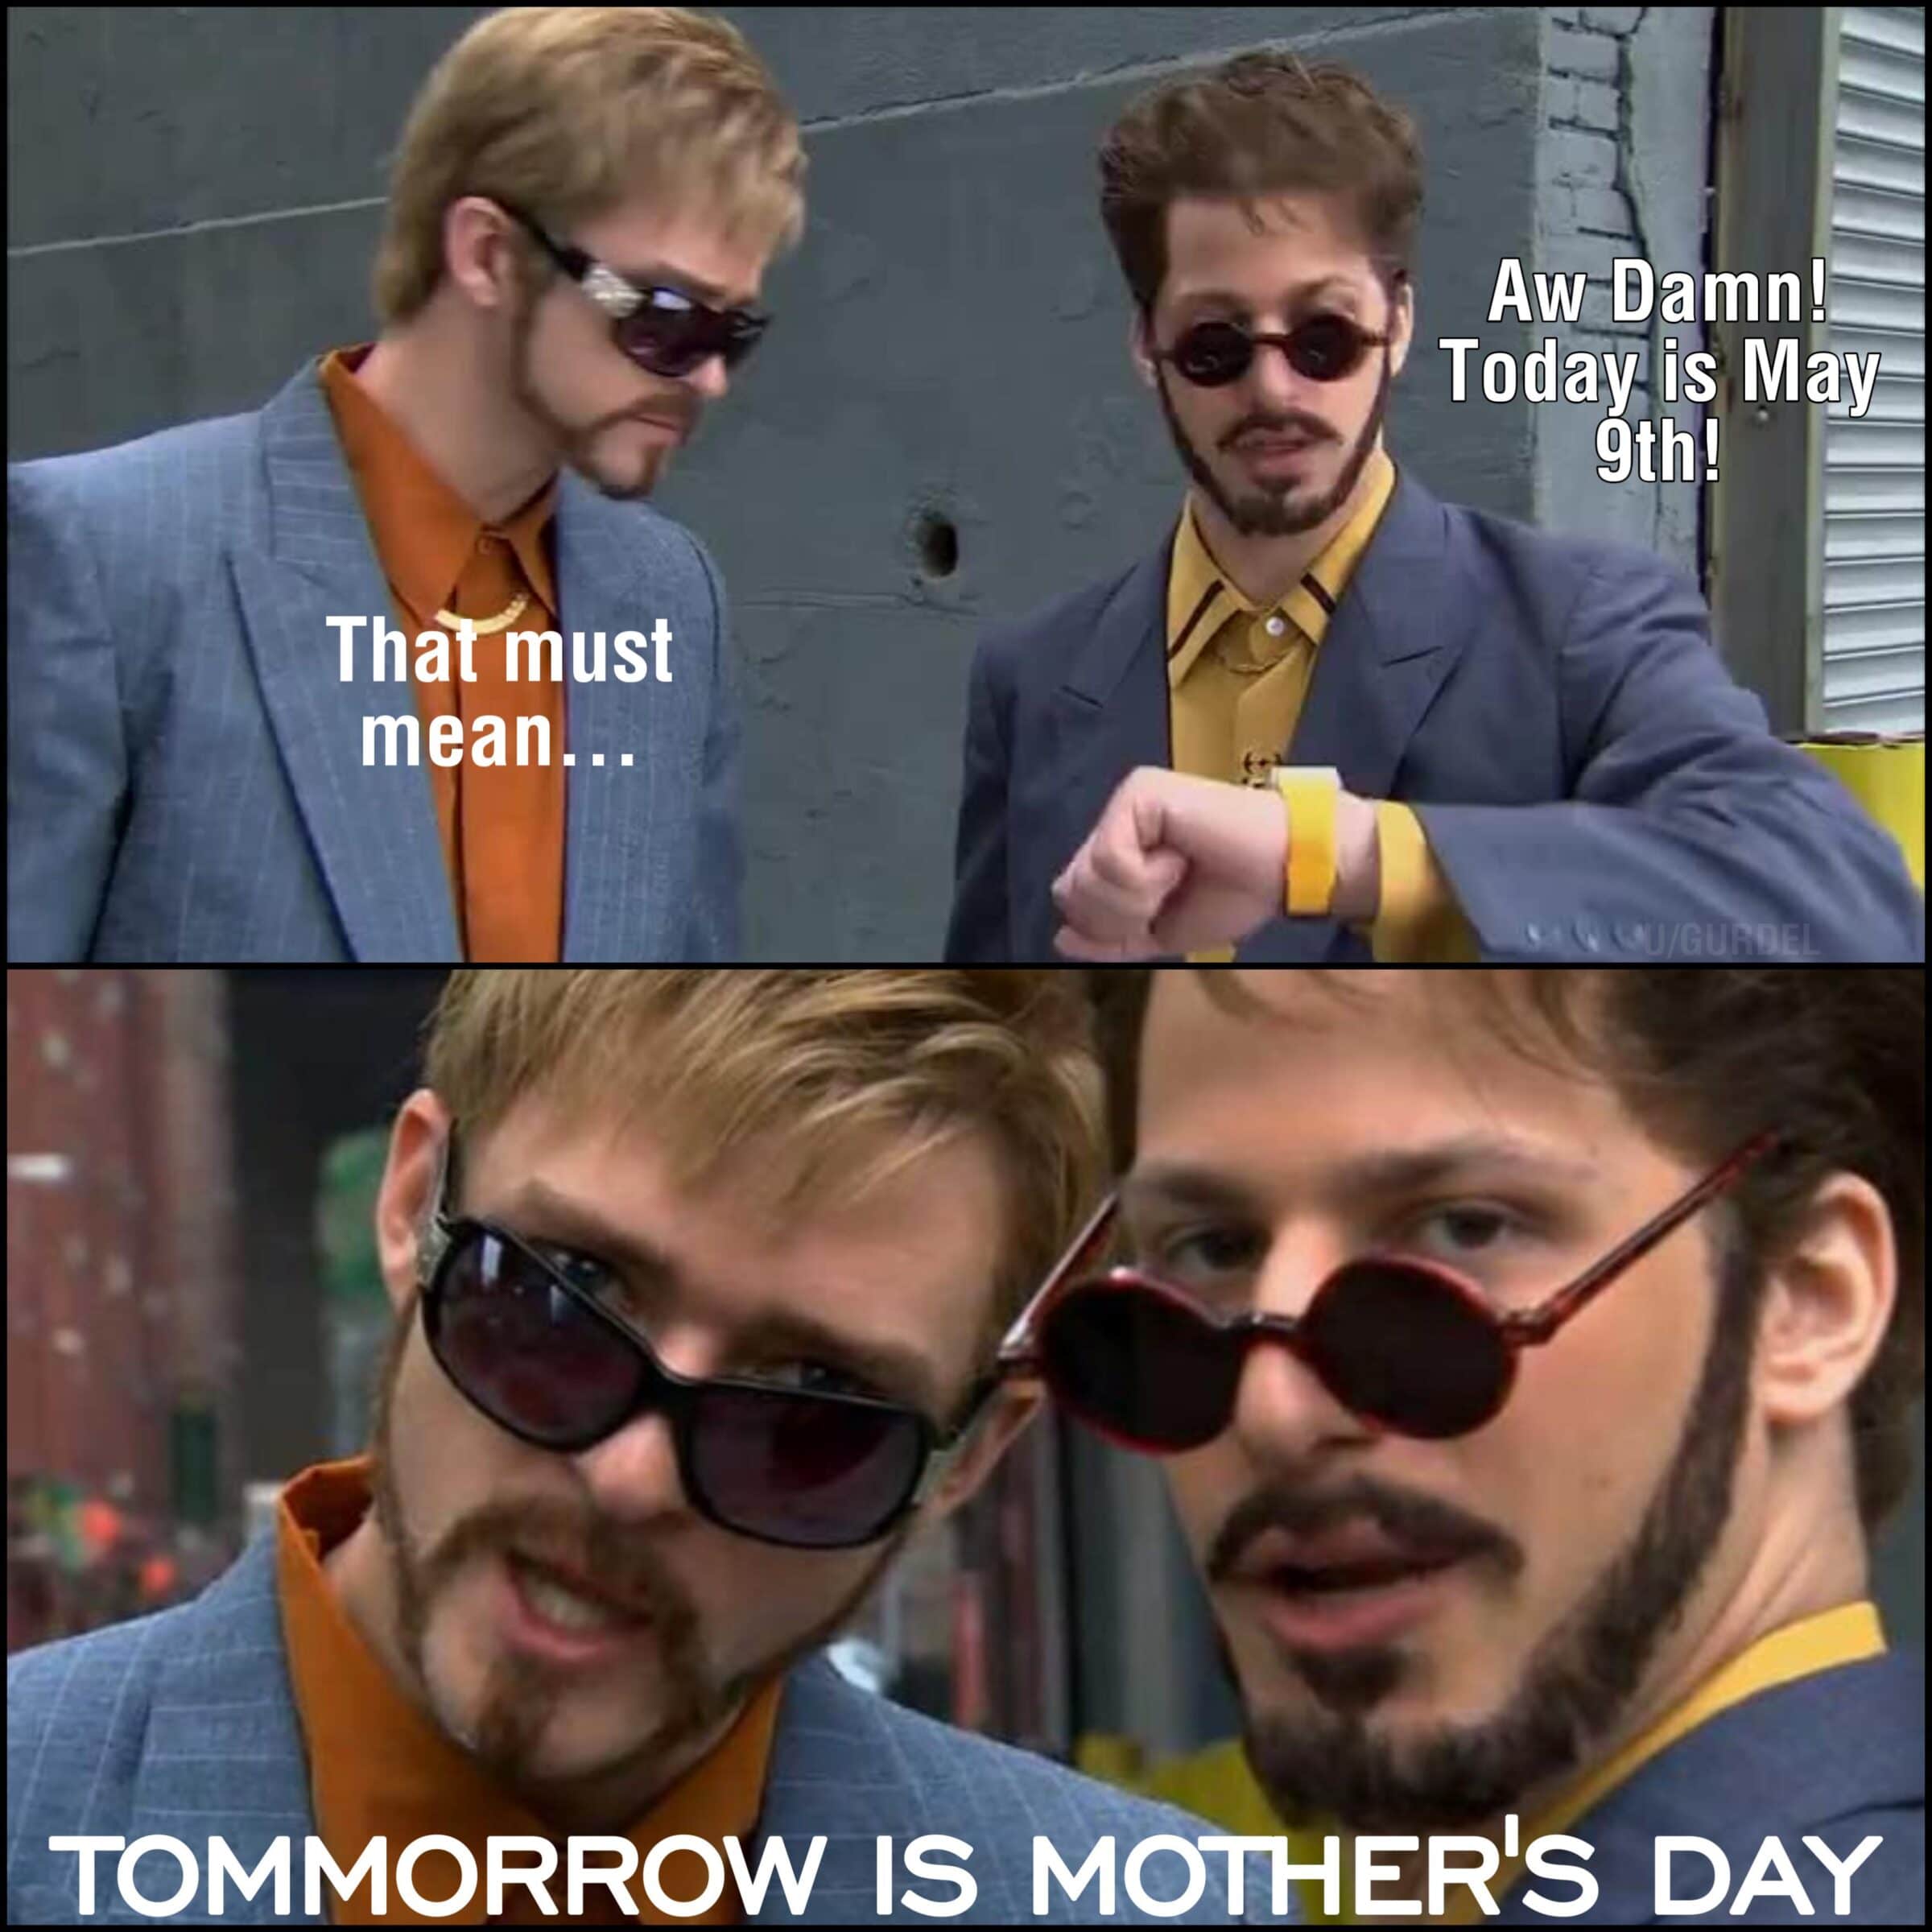 Wholesome memes, Day, Roy, March Wholesome Memes Wholesome memes, Day, Roy, March text: Aw ThaYmust mean... TOMMORROW IS MOTHER'S DAY 